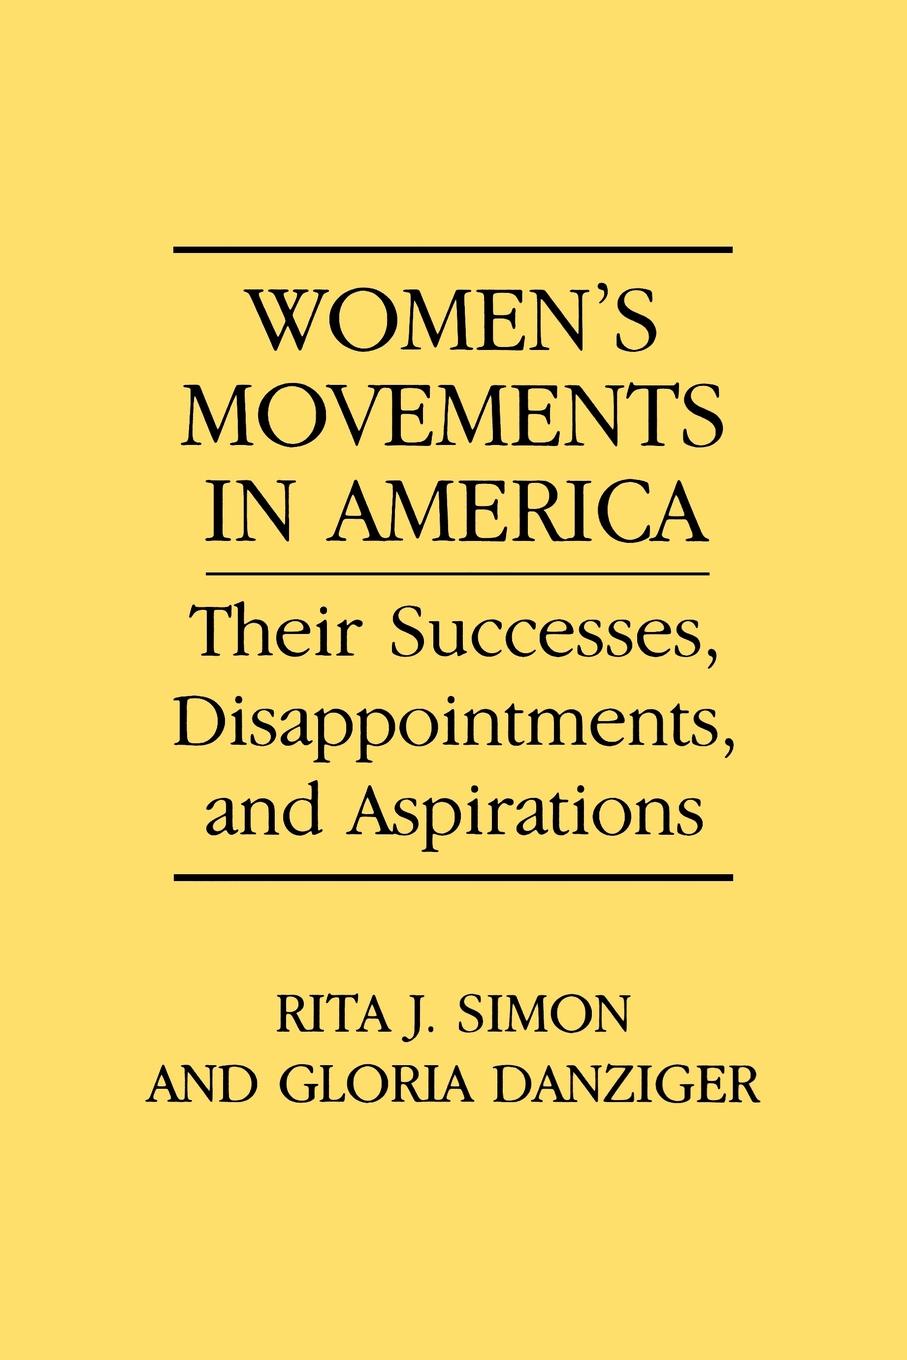 Women`s Movements in America. Their Successes, Disappointments, and Aspirations